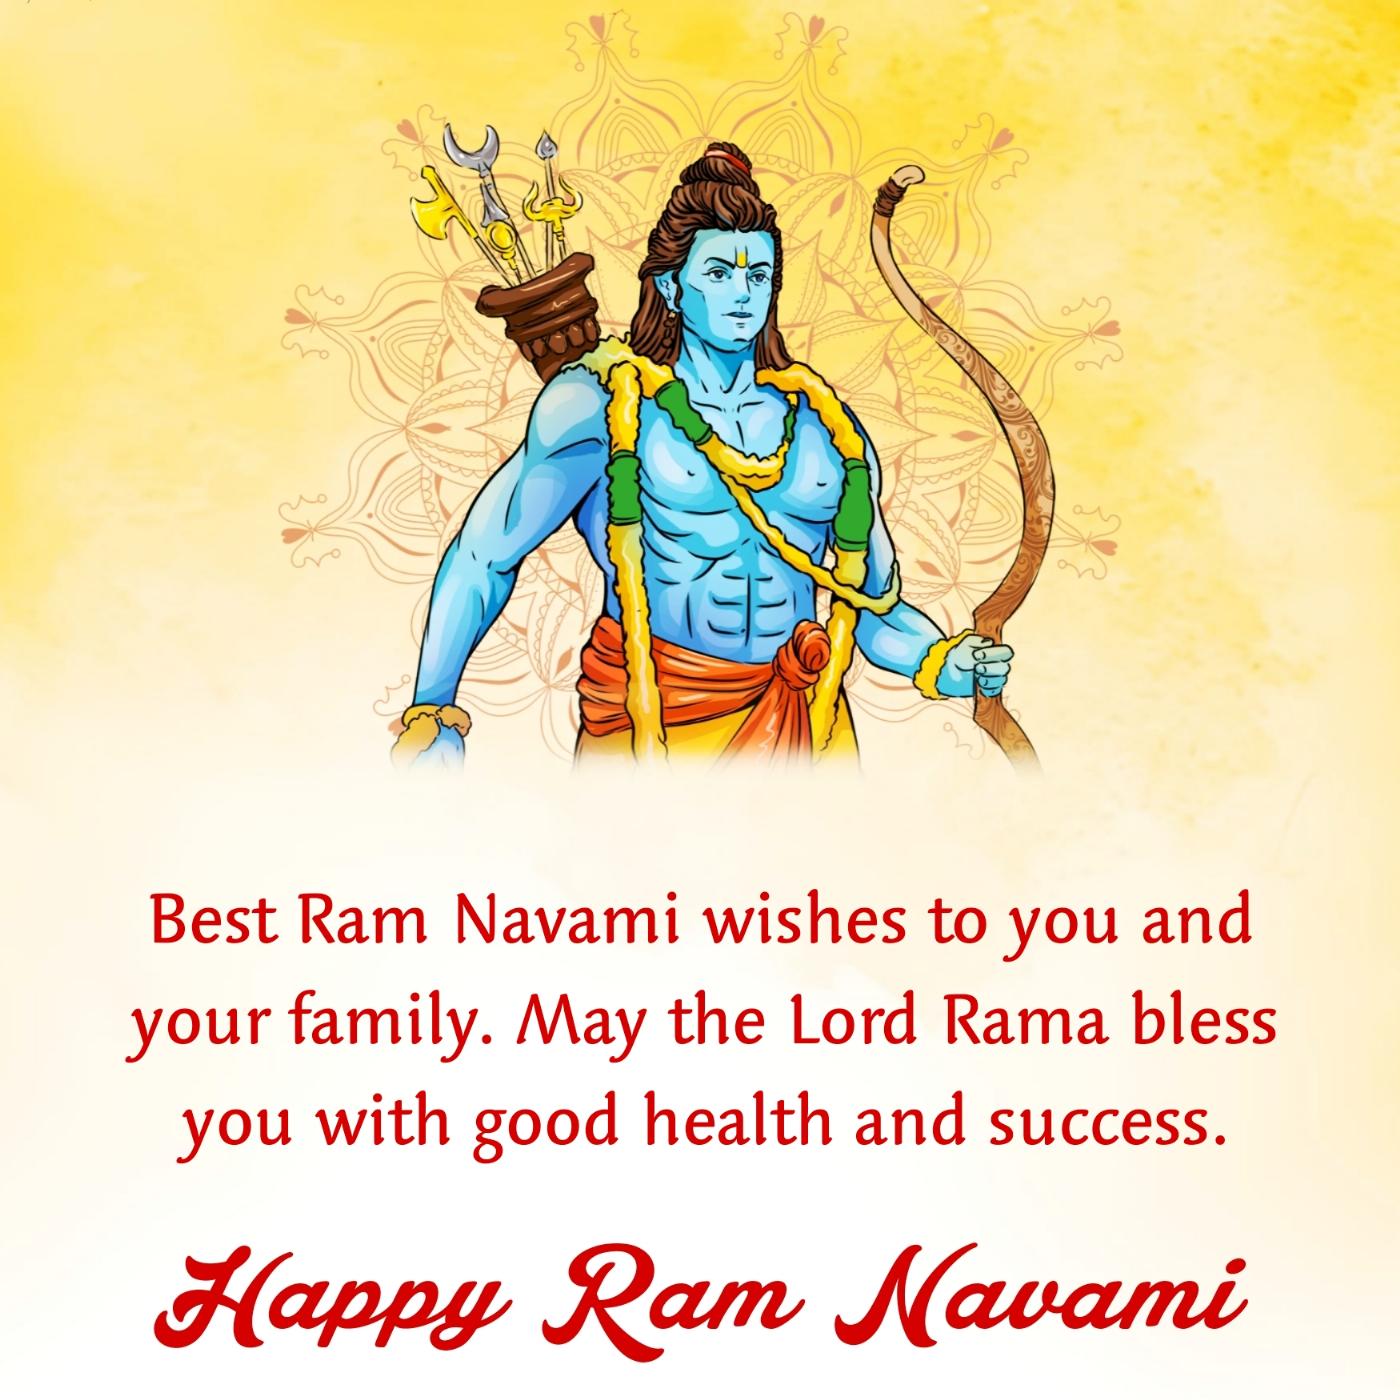 Best Ram Navami wishes to you and your family